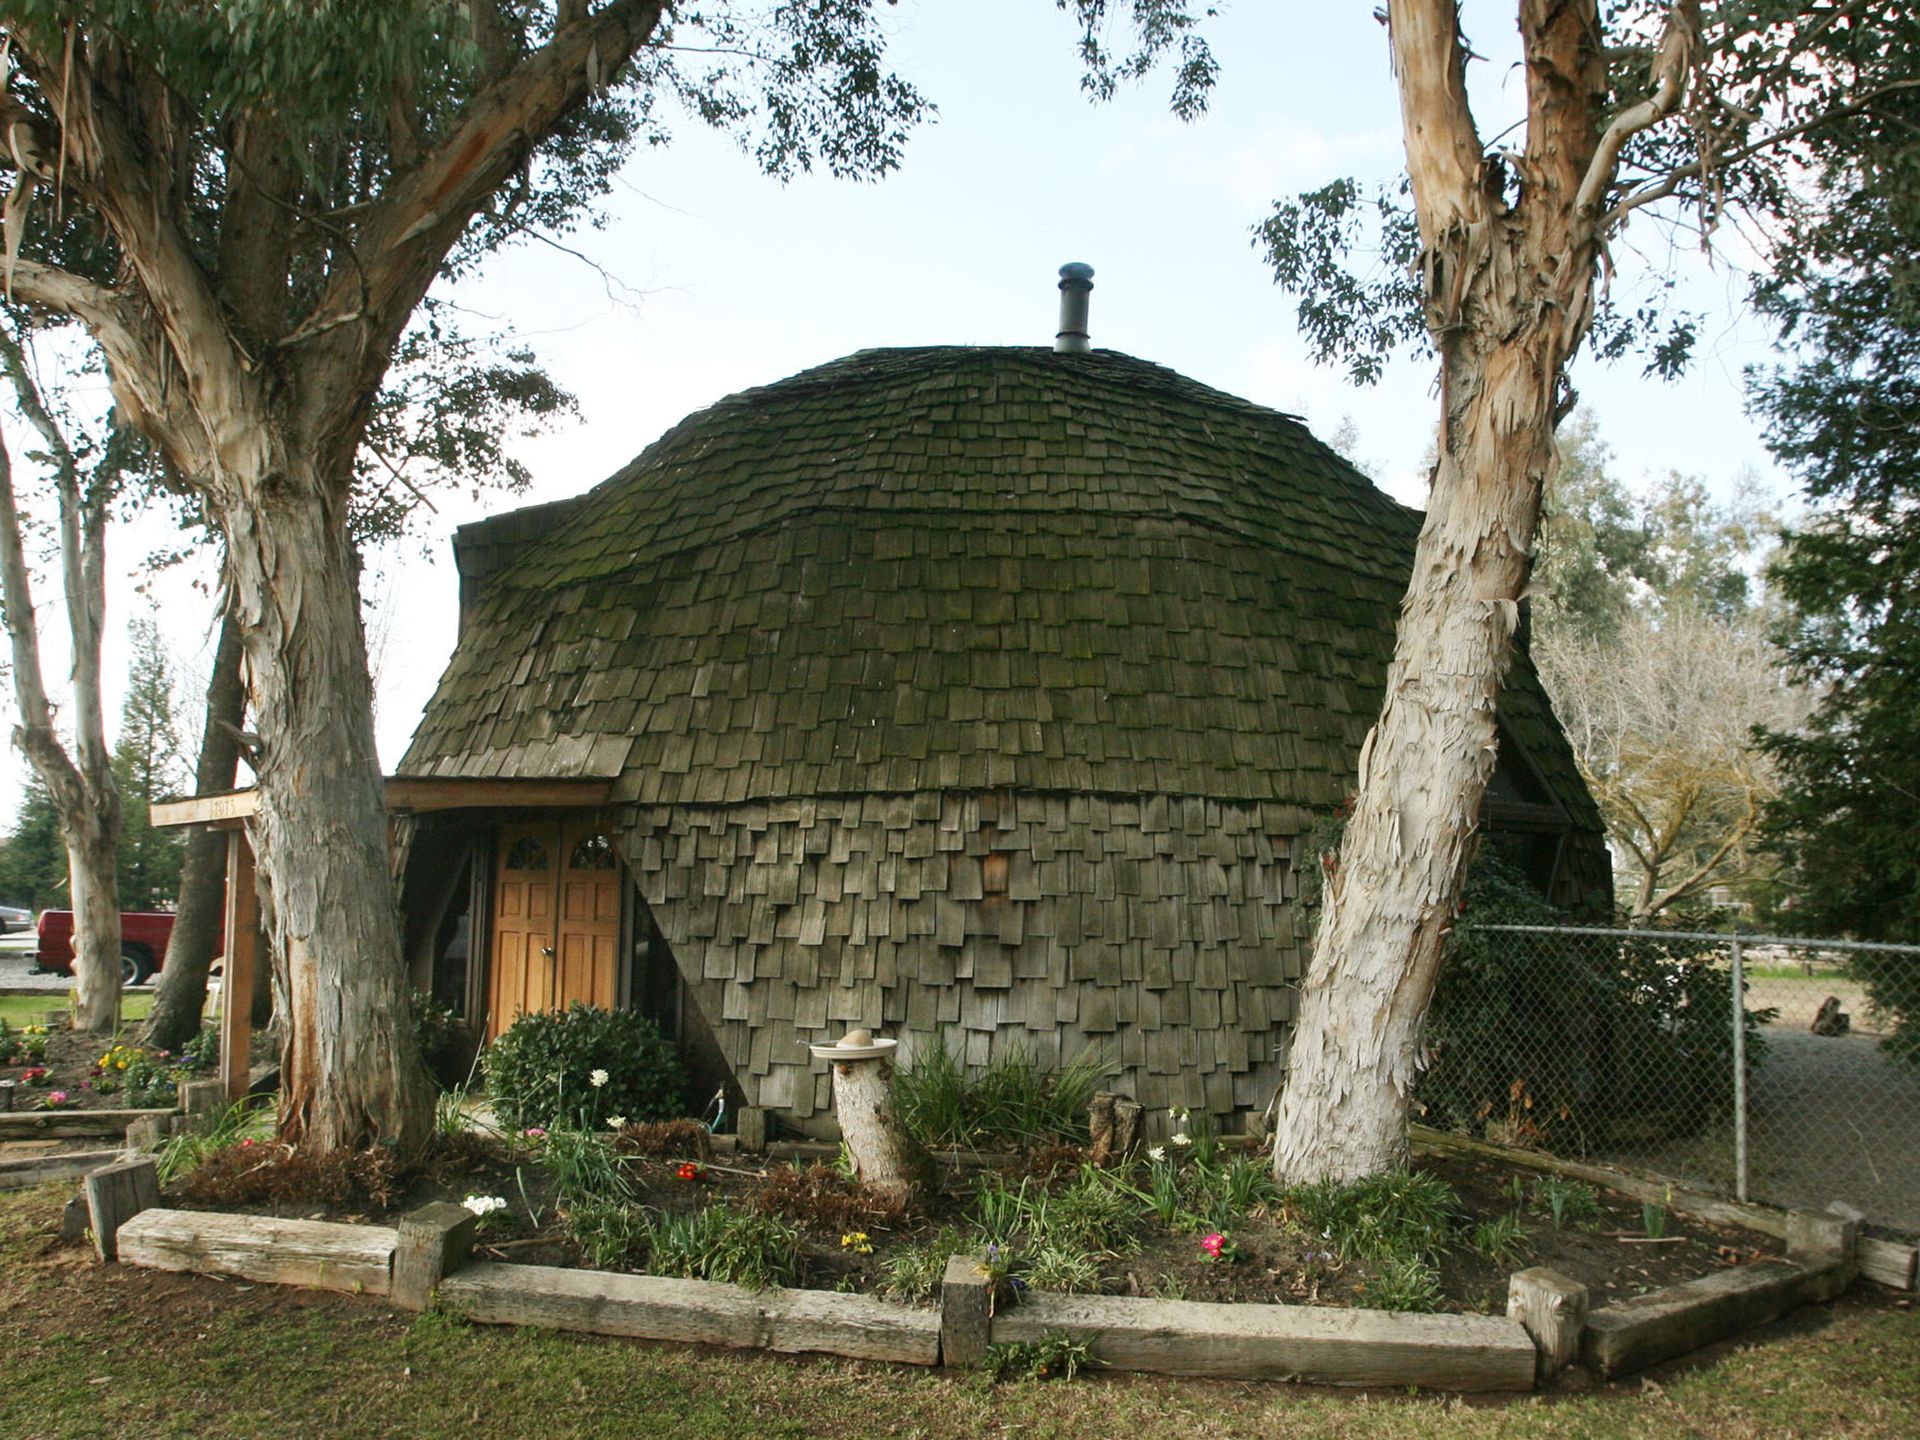 Dome, sweet home: climate shelters past, present and future